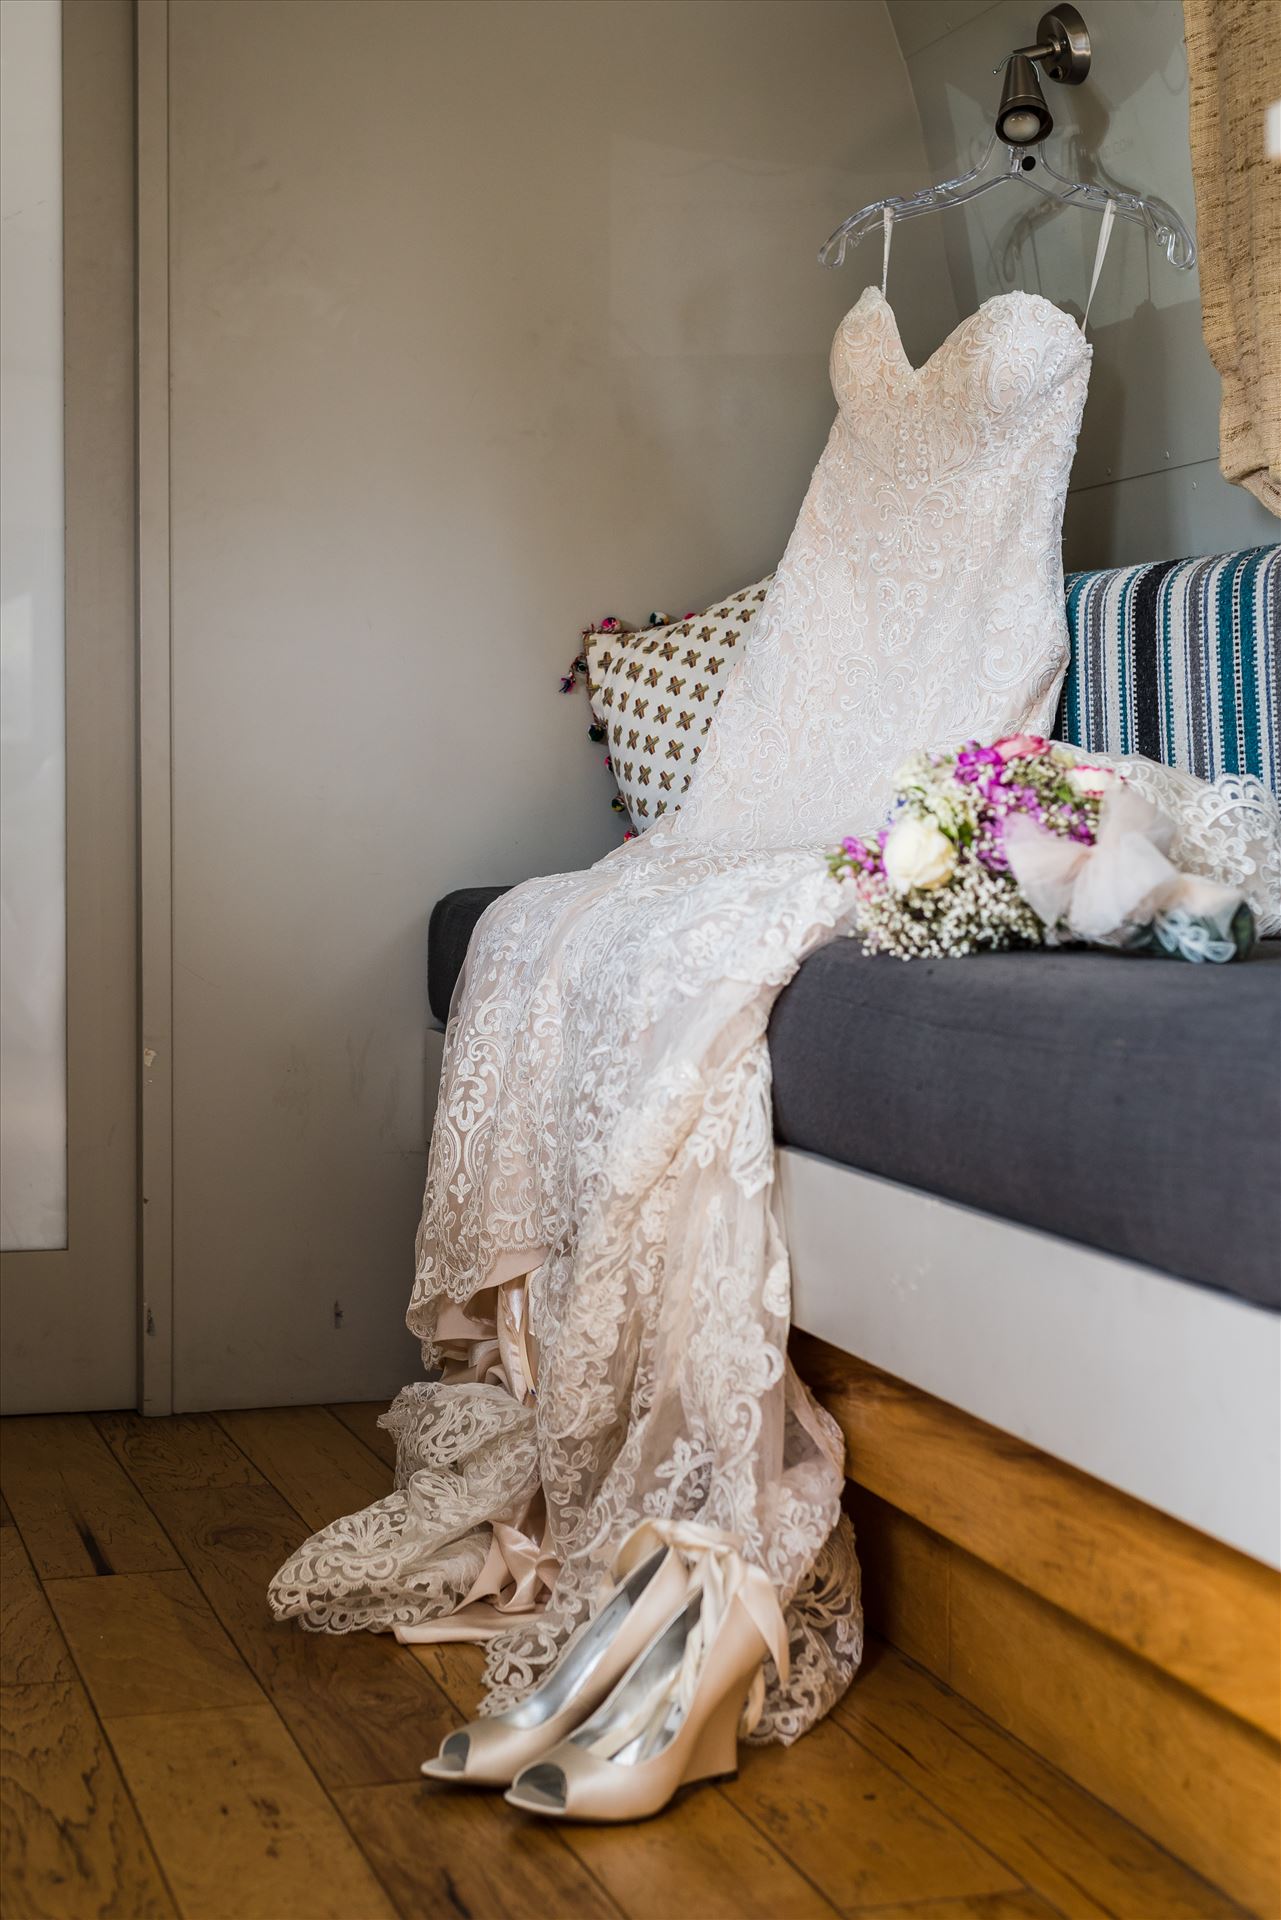 Ana and Juan 08 - Wedding photography at the Kimpton Goodland Hotel in Santa Barbara California by Mirror's Edge Photography.  Wedding dress, flowers and shoes in Airstream by Sarah Williams